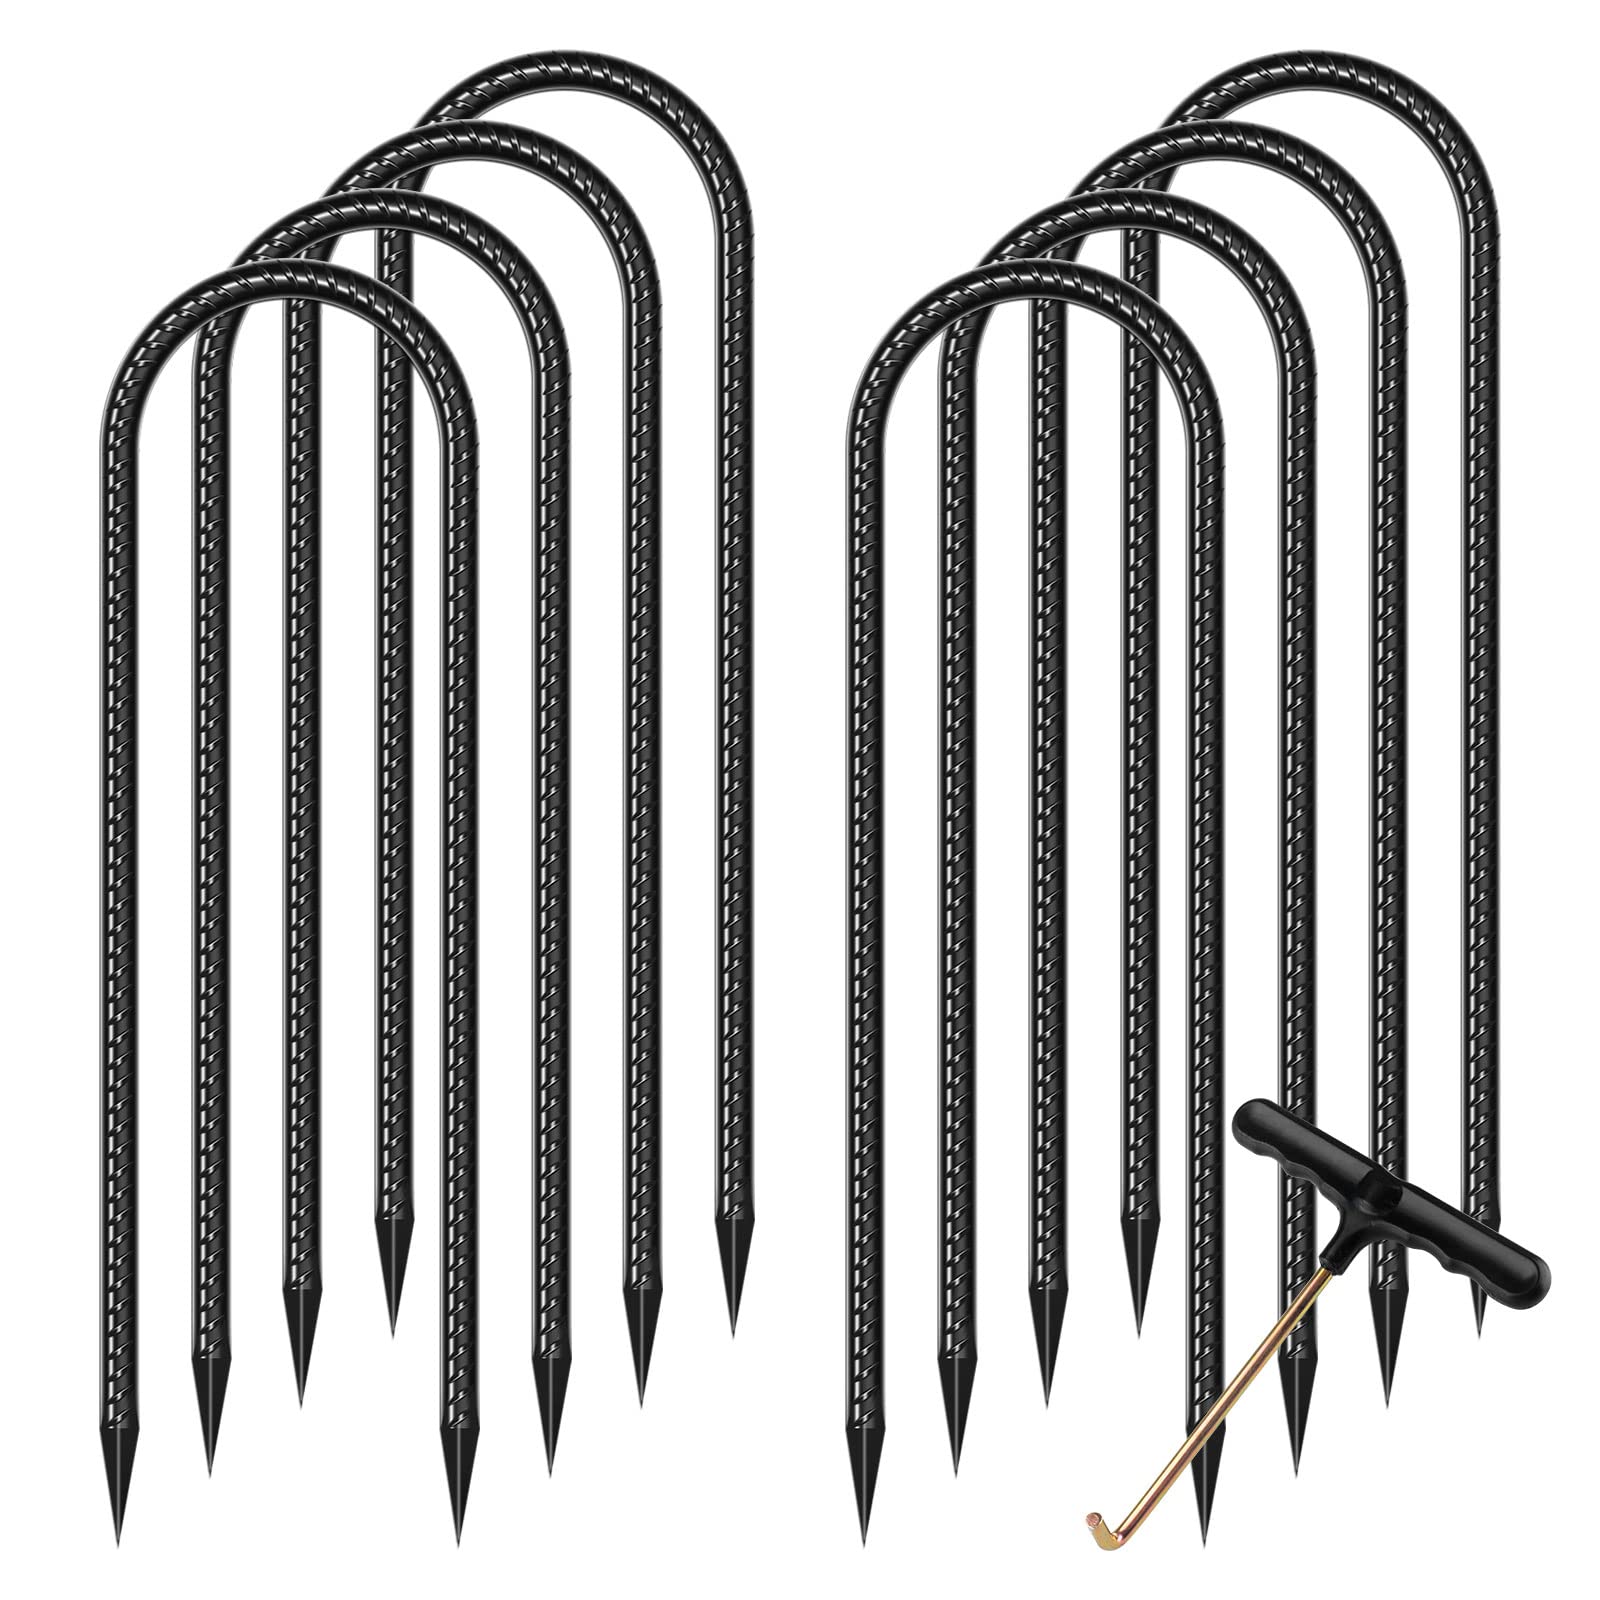 UNIPRIMEBBQ Trampoline Stakes U Shaped Anchors Heavy Duty Metal - Long Trampolines Ground Wind Stakes for Soccer Goals, Camping Tents, Garde